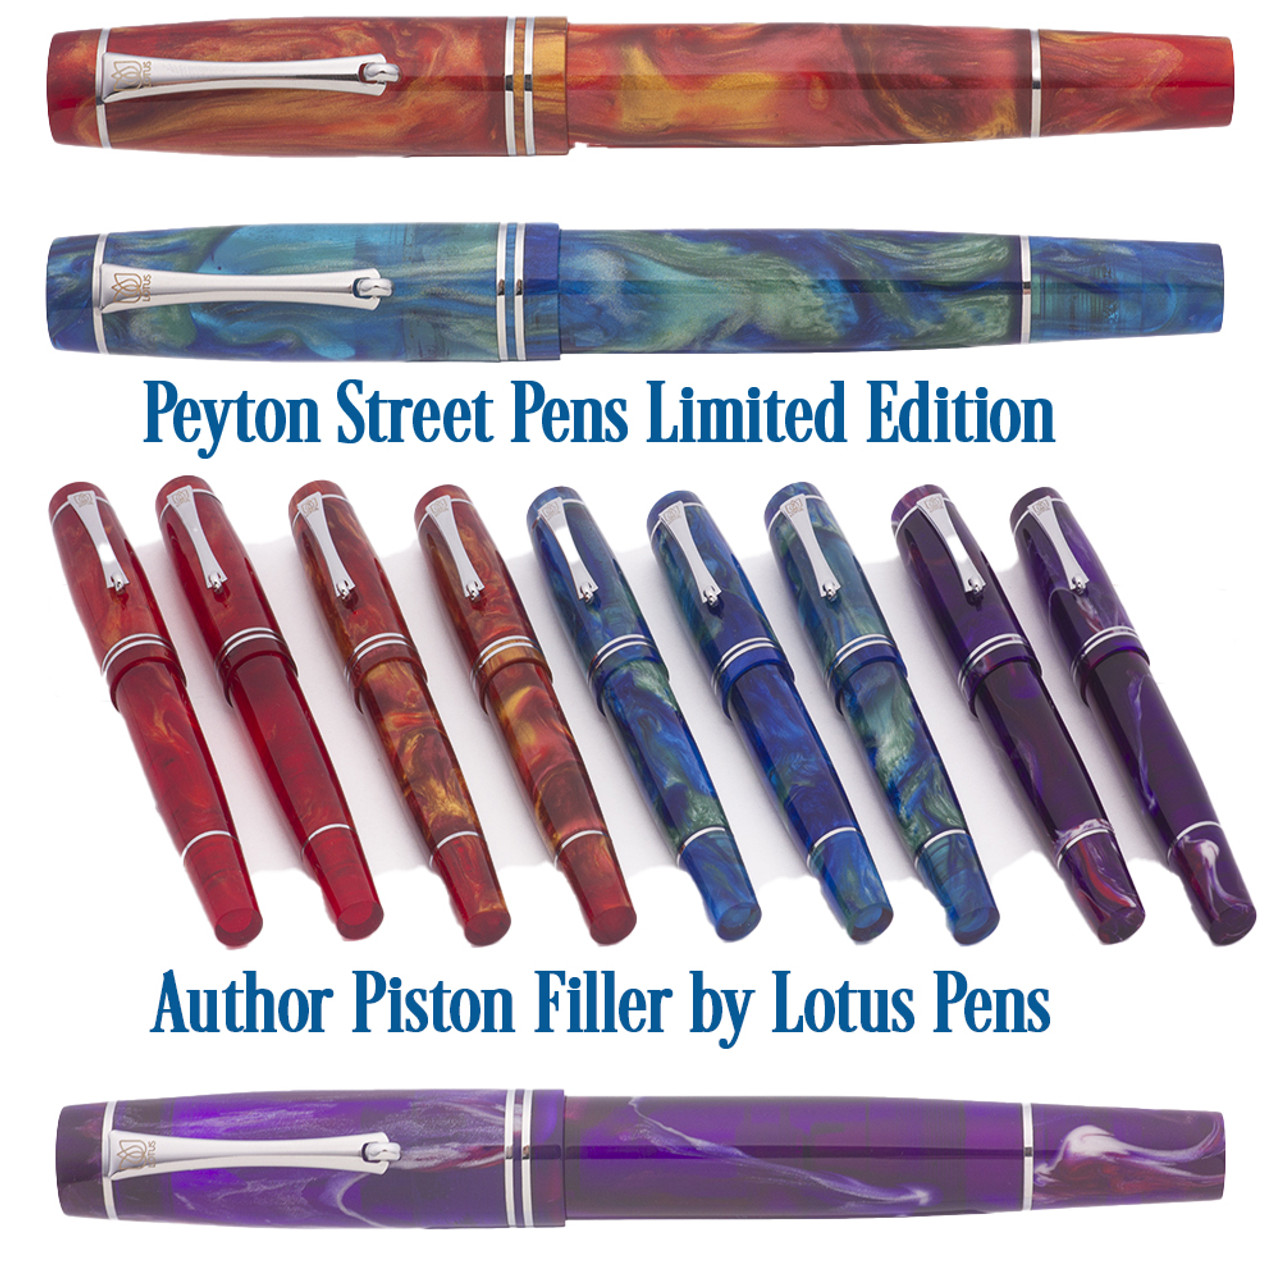 PSP Lotus Pens LE "Author" Piston Fill Fountain Pen - Only 9 Made,  Alumilite, JoWo #6 nibs (New in Box)